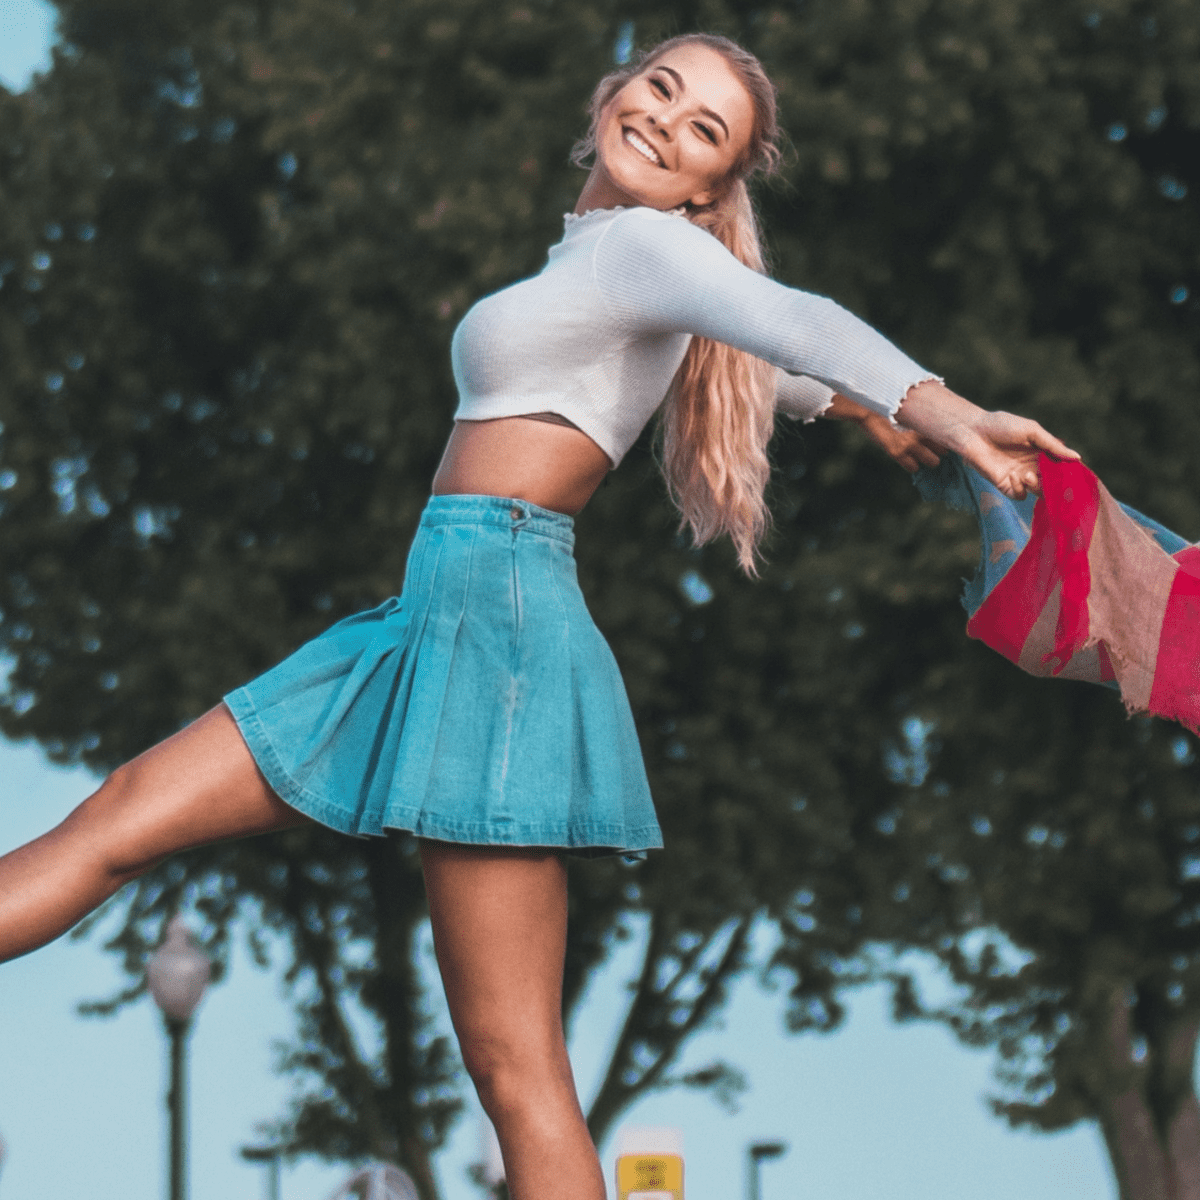 Styling Tips and Ways to Wear Mini Skirts